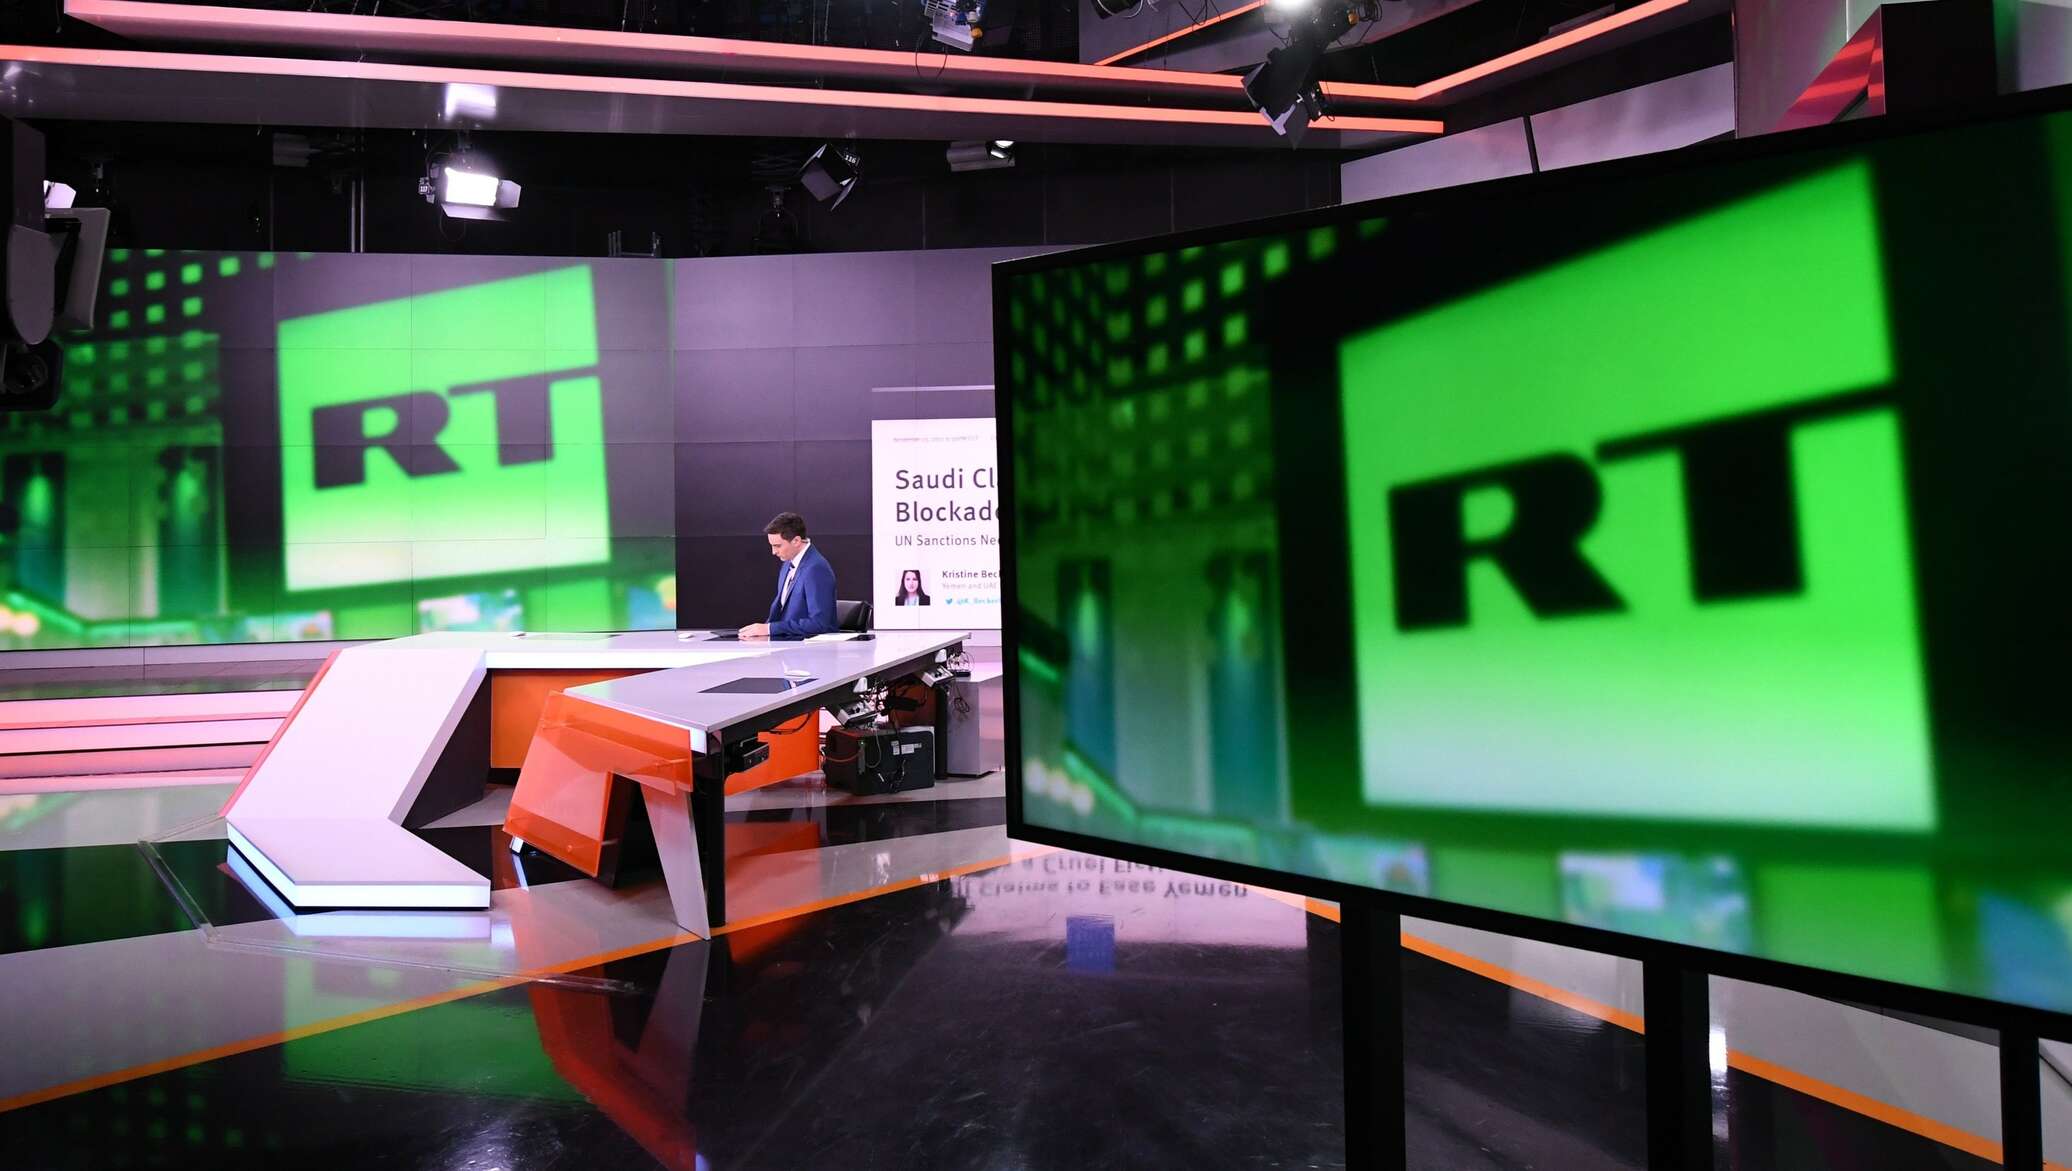 Rt shows